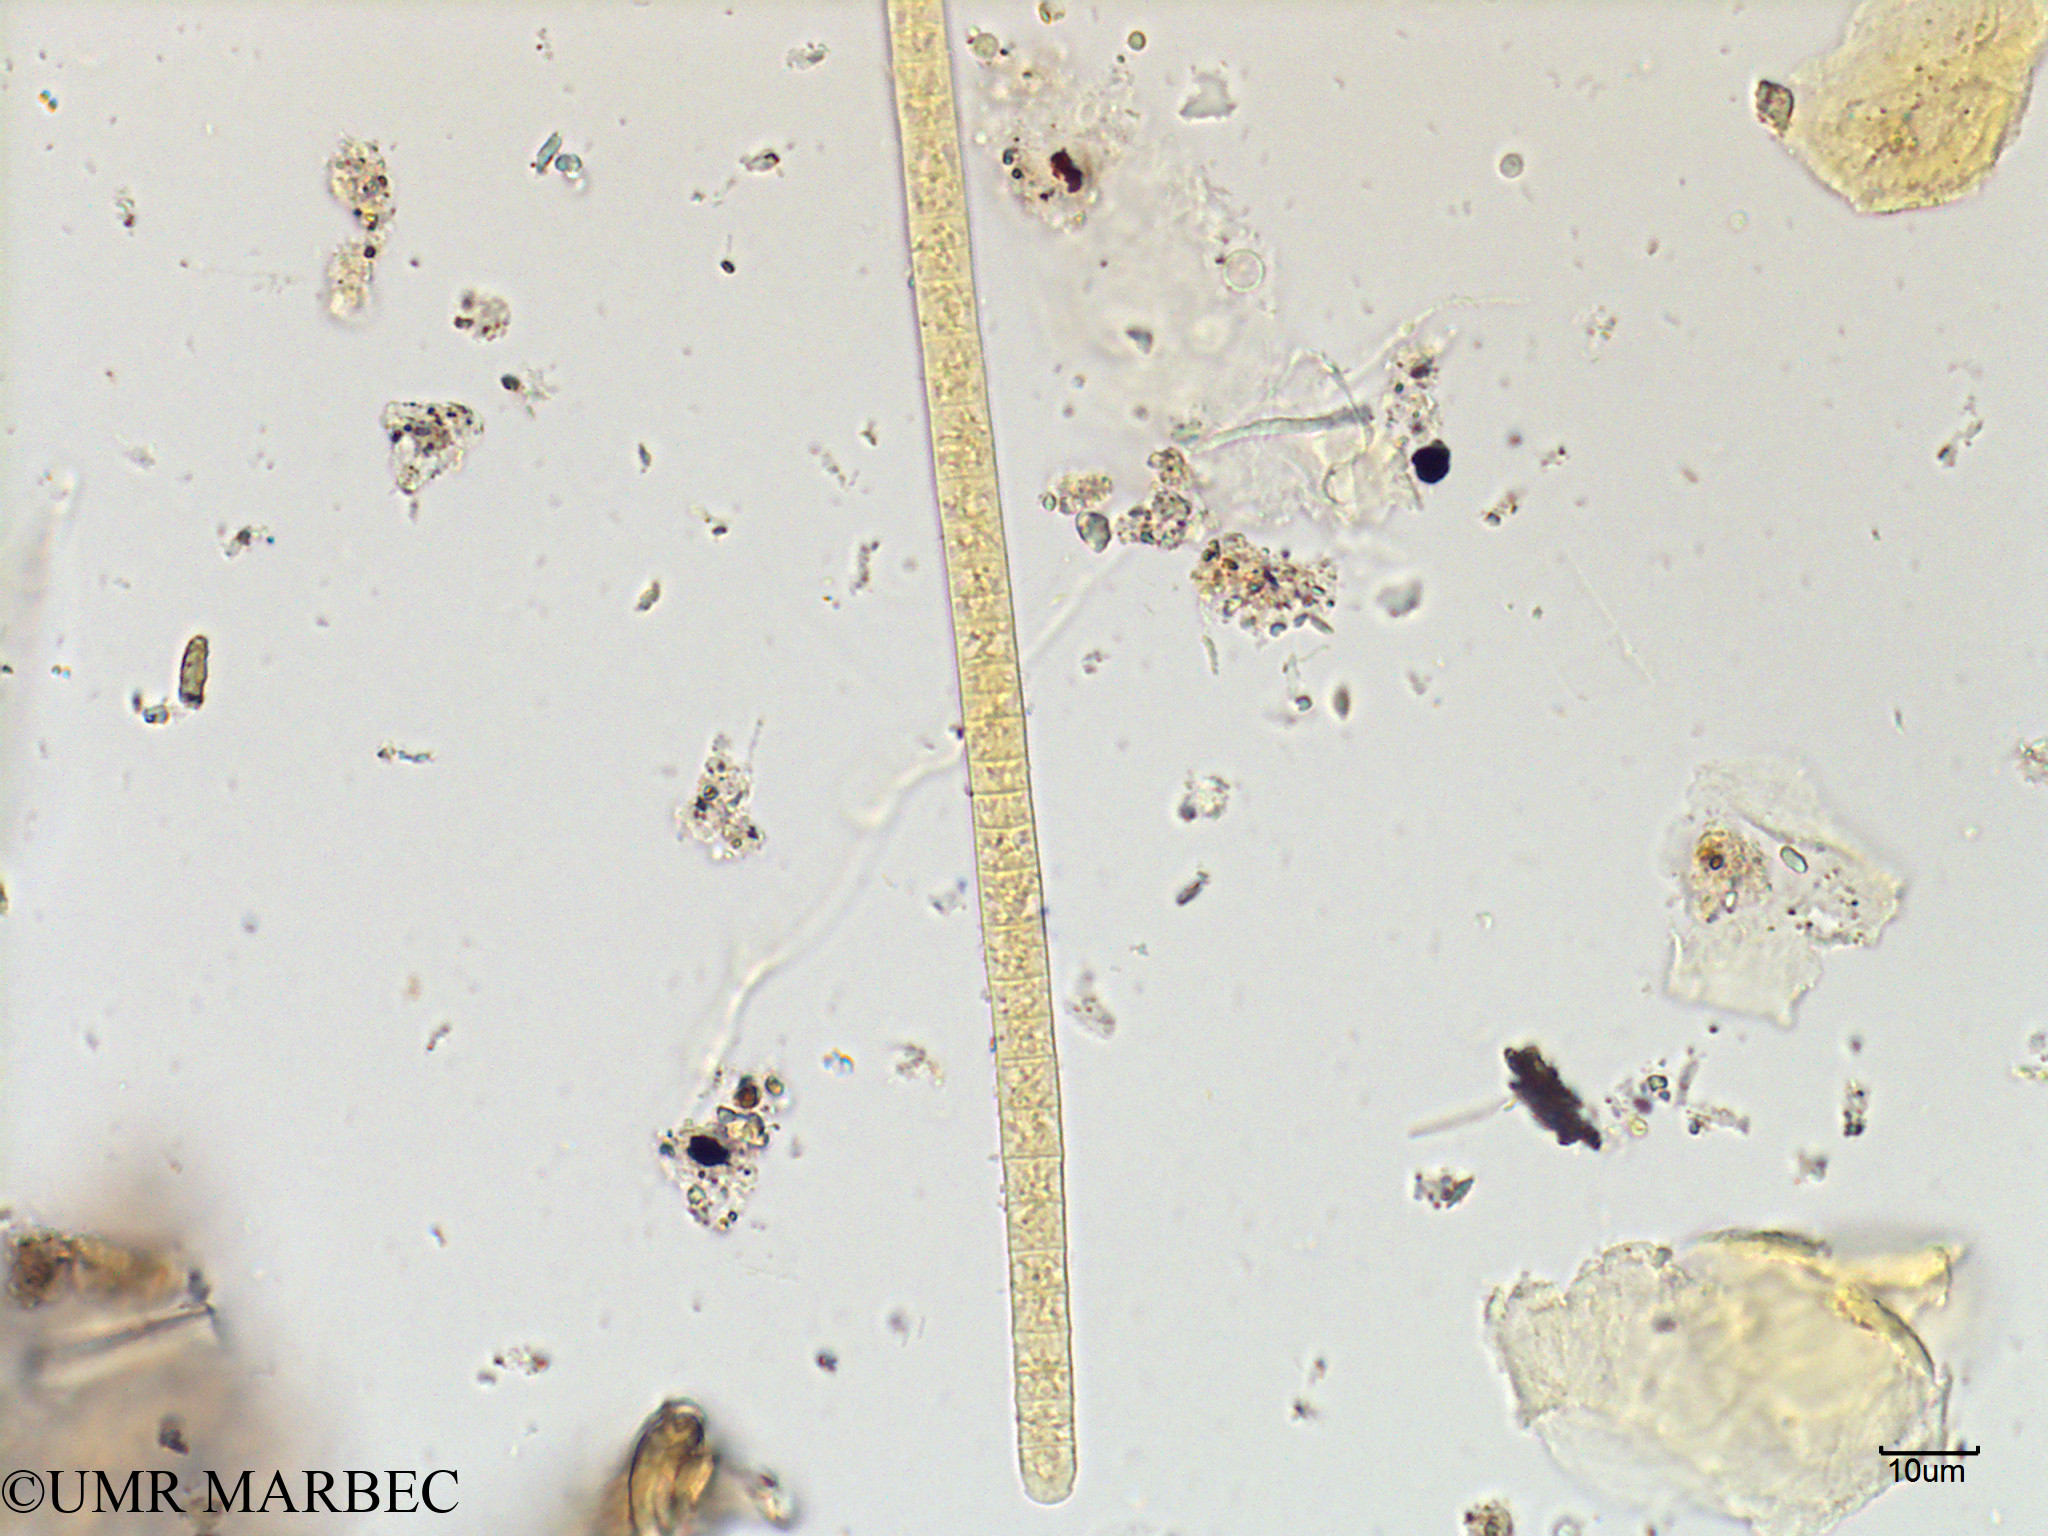 phyto/Scattered_Islands/mayotte_lagoon/SIREME May 2016/Trichodesmium sp4 (MAY2_trichodesmium-5).tif(copy).jpg